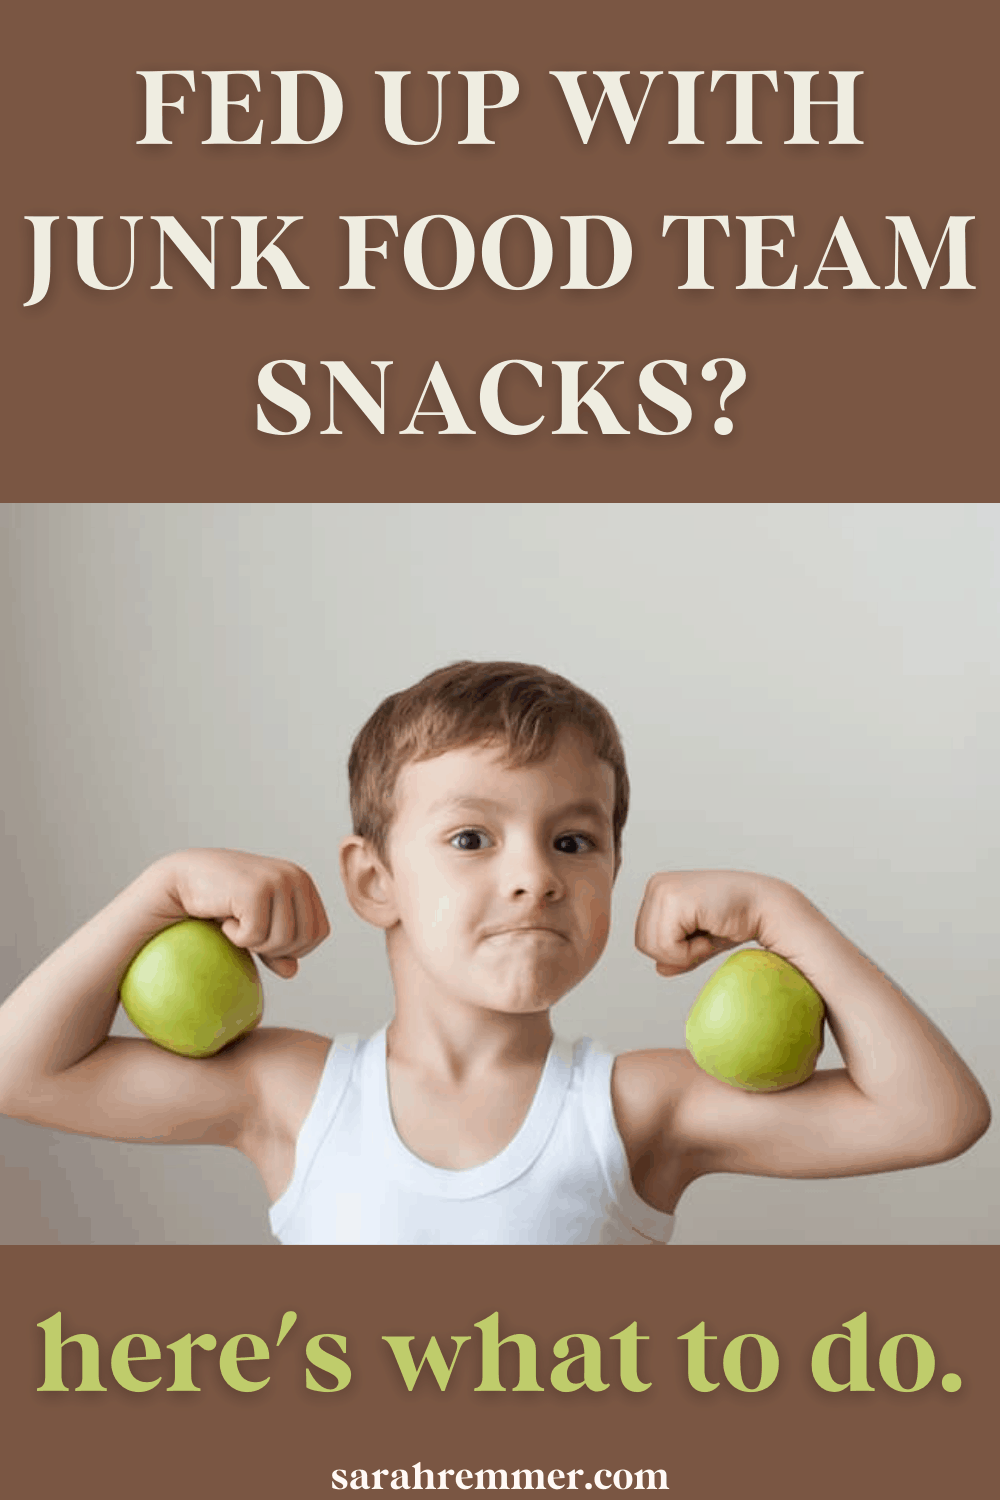 At first, I didn’t know the ropes of being a soccer mom. I didn’t know to expect team snacks meant cookies, donuts and fruit punch! If you’re also fed up with junk food team snacks – here’s what to do!